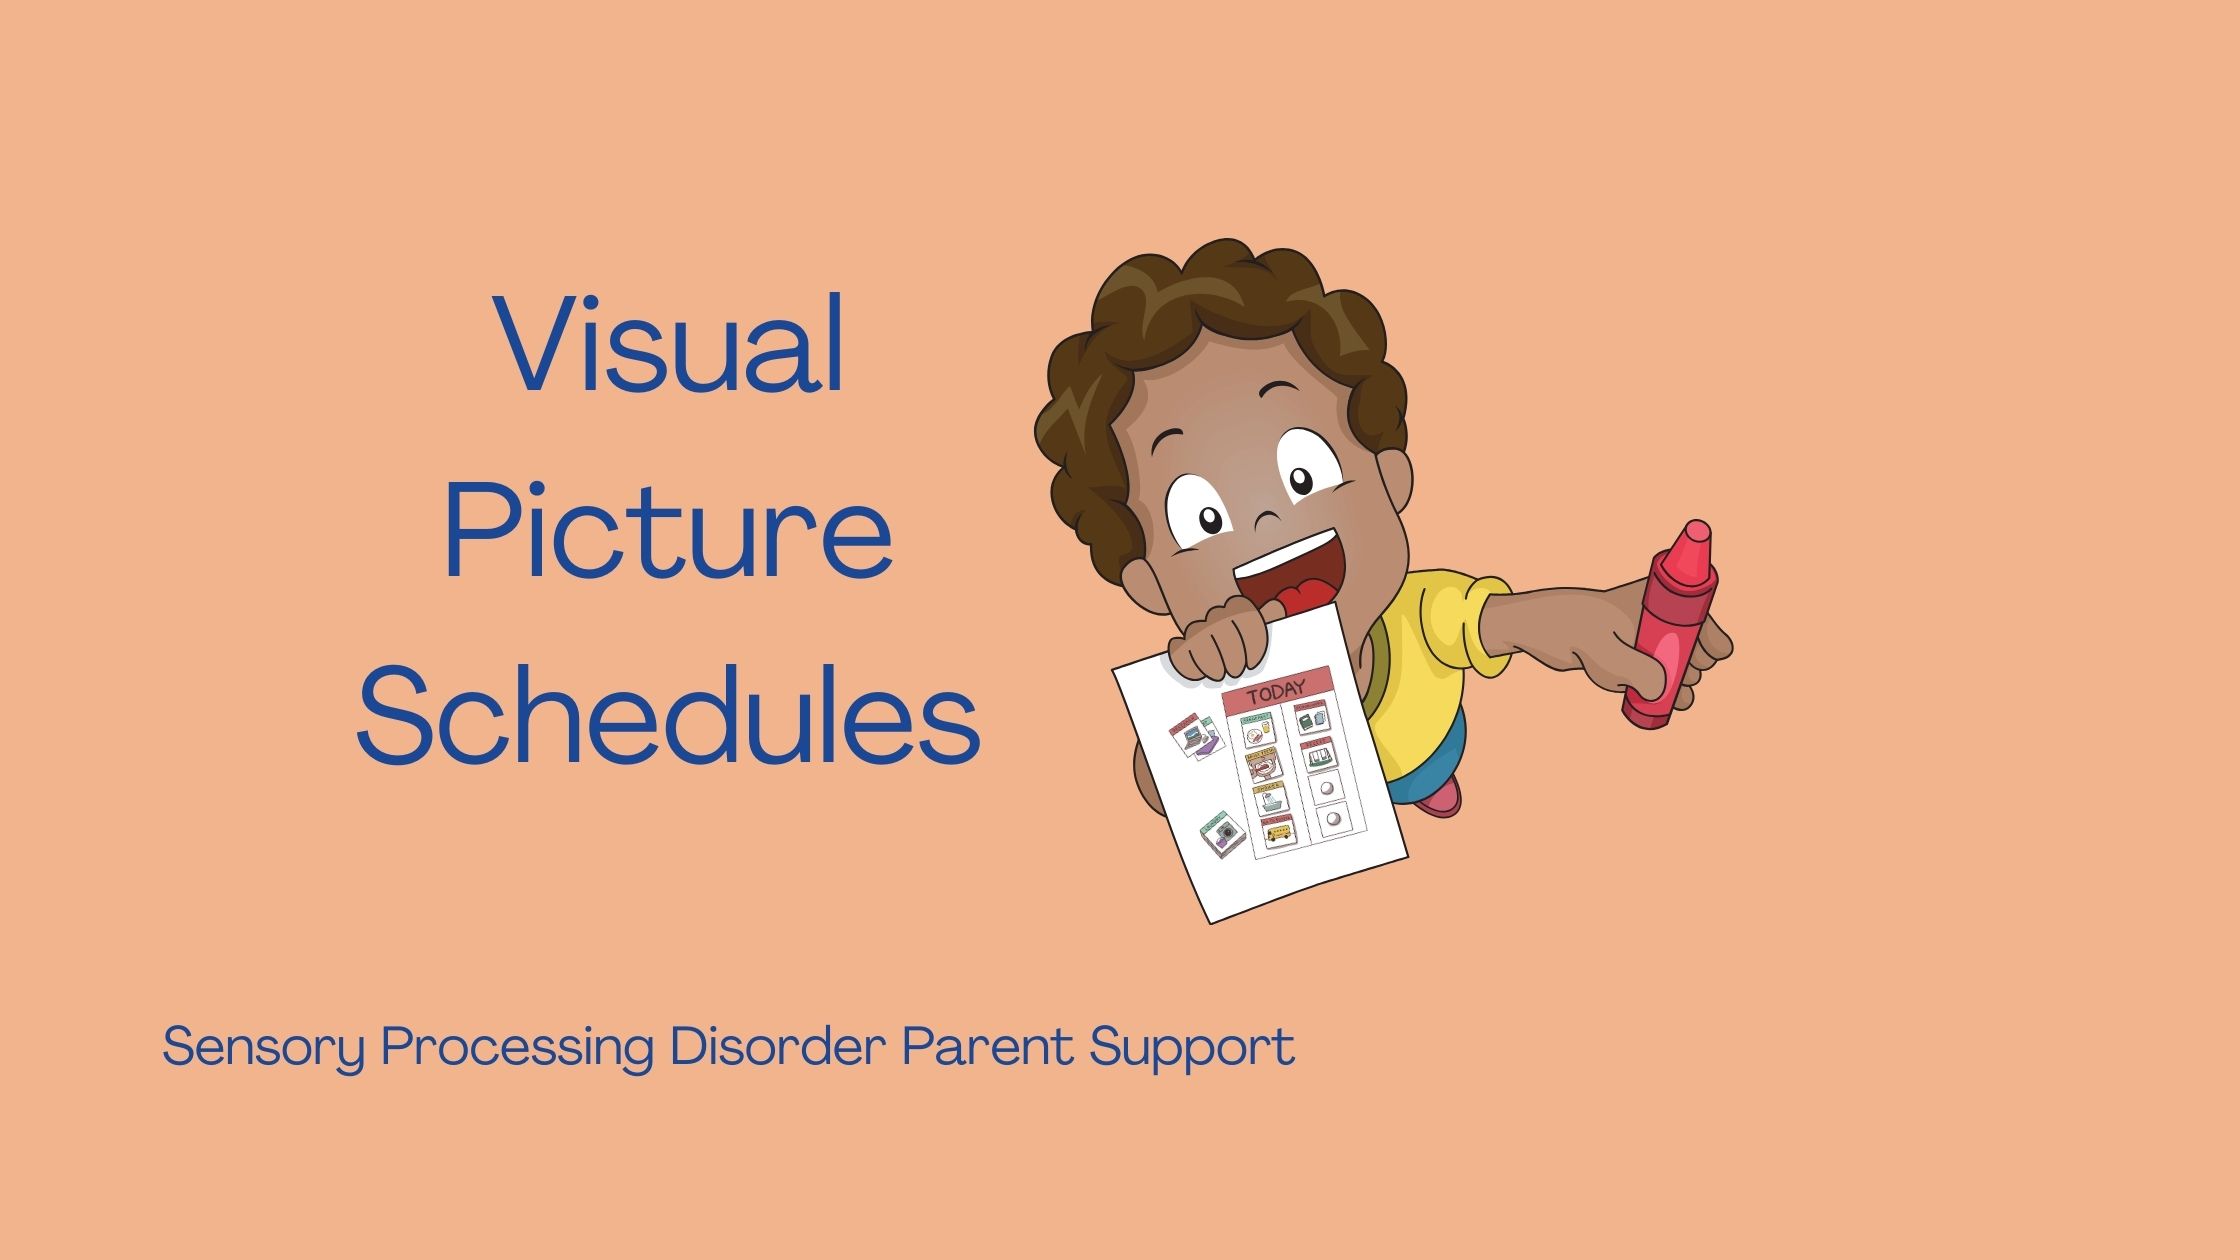 child with sensory differences holding a visual picture schedule Visual Picture Schedules